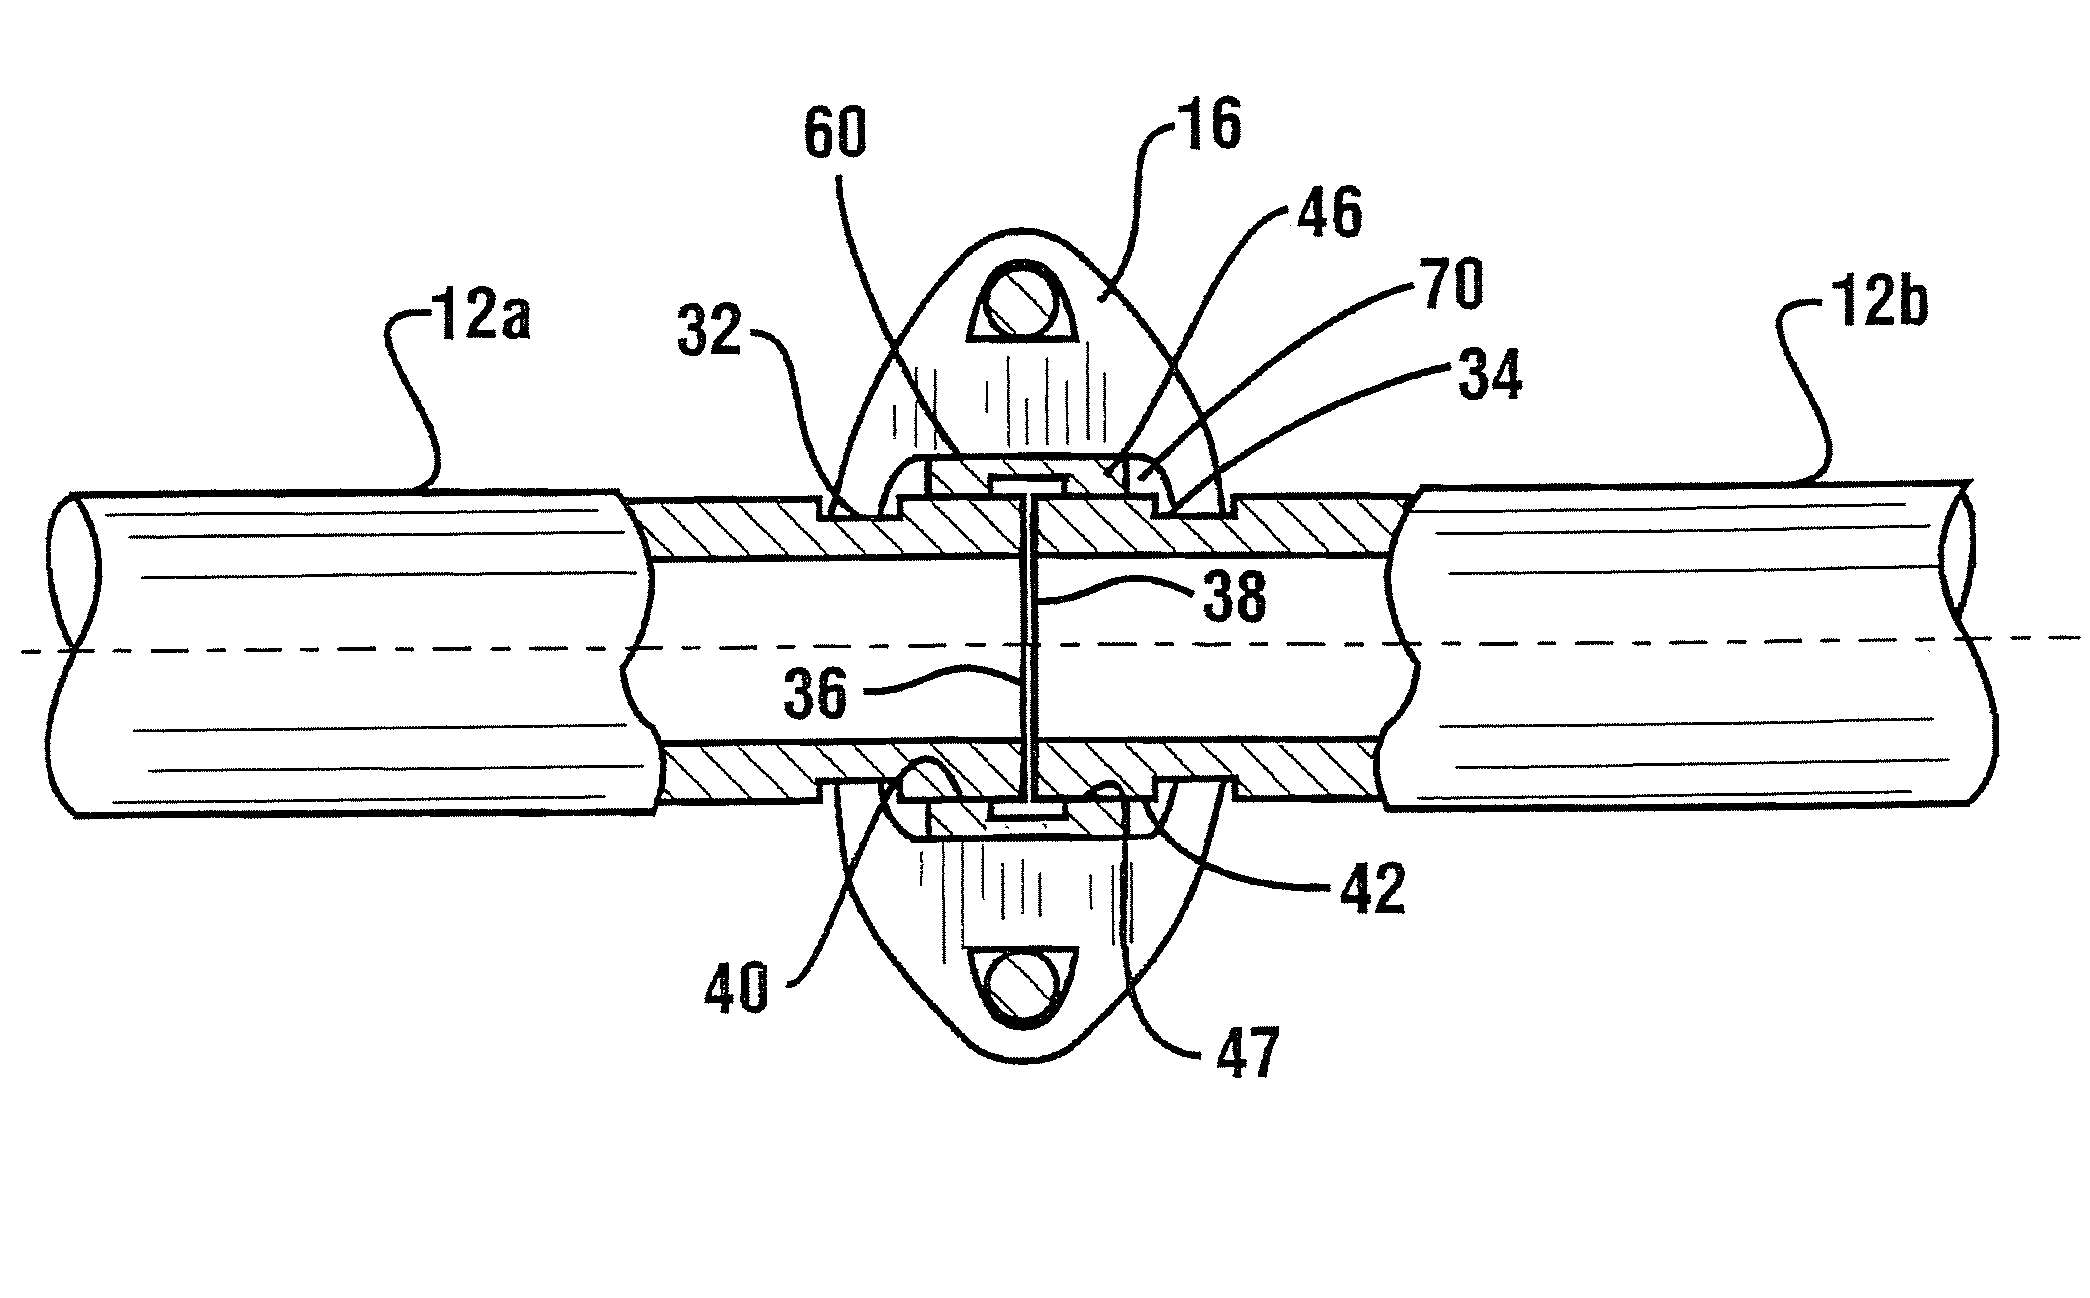 System And Method Of Assembly Of CPVC Fire Sprinkler System Employing Mechanical Couplings And Supports